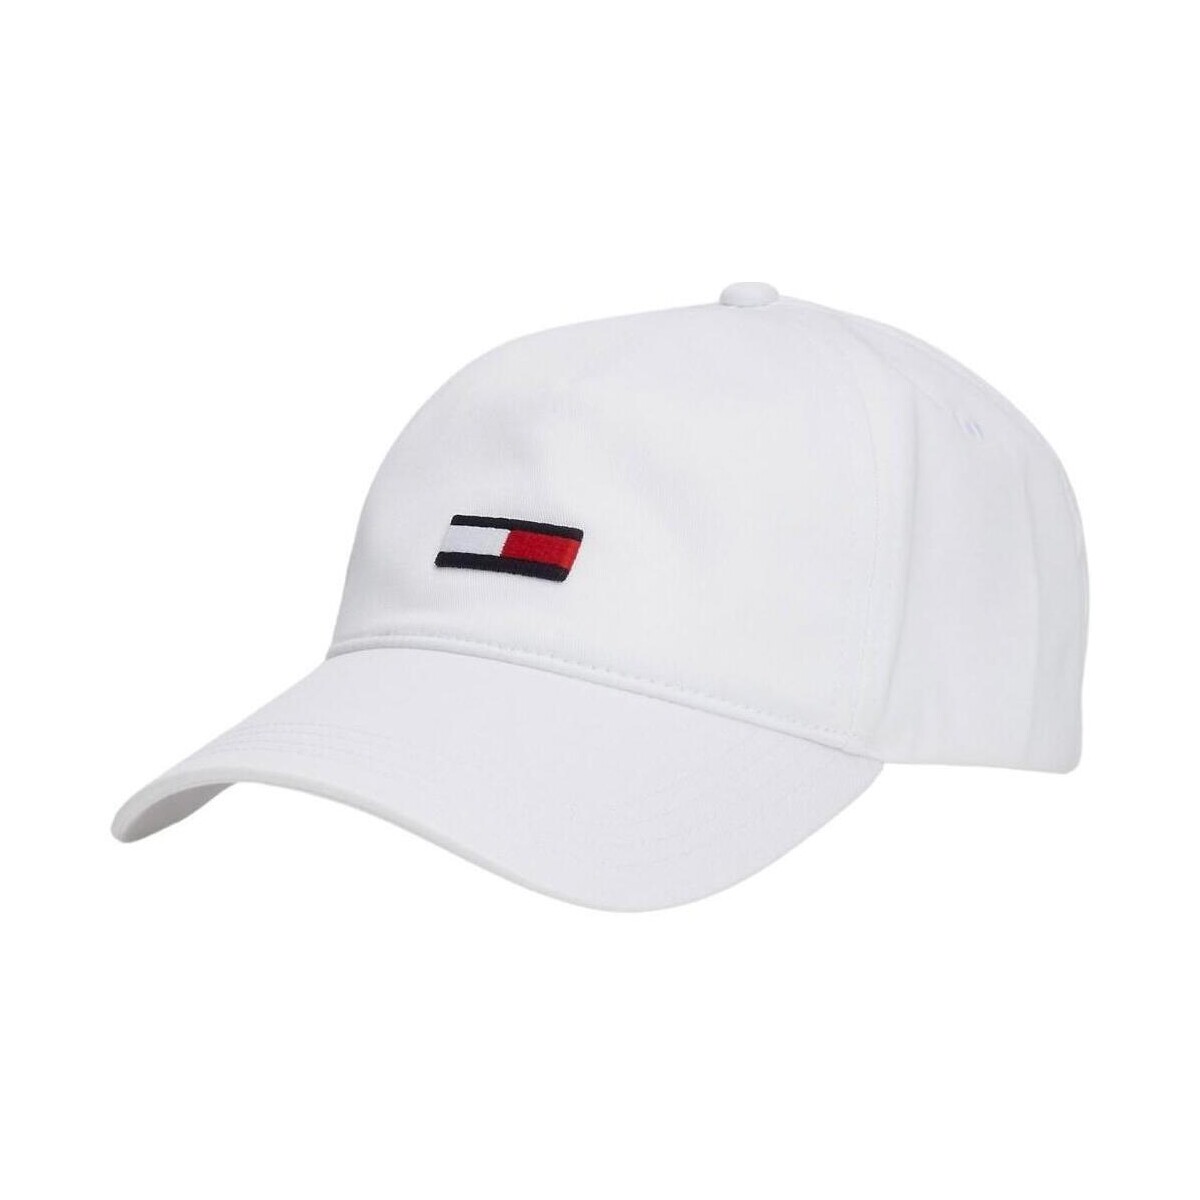 Tommy Crossover Hilfiger Gestreepte loungeshort met contrasterende band in meerdere kleuren Casquettes Tommy Crossover Jeans  Blanc